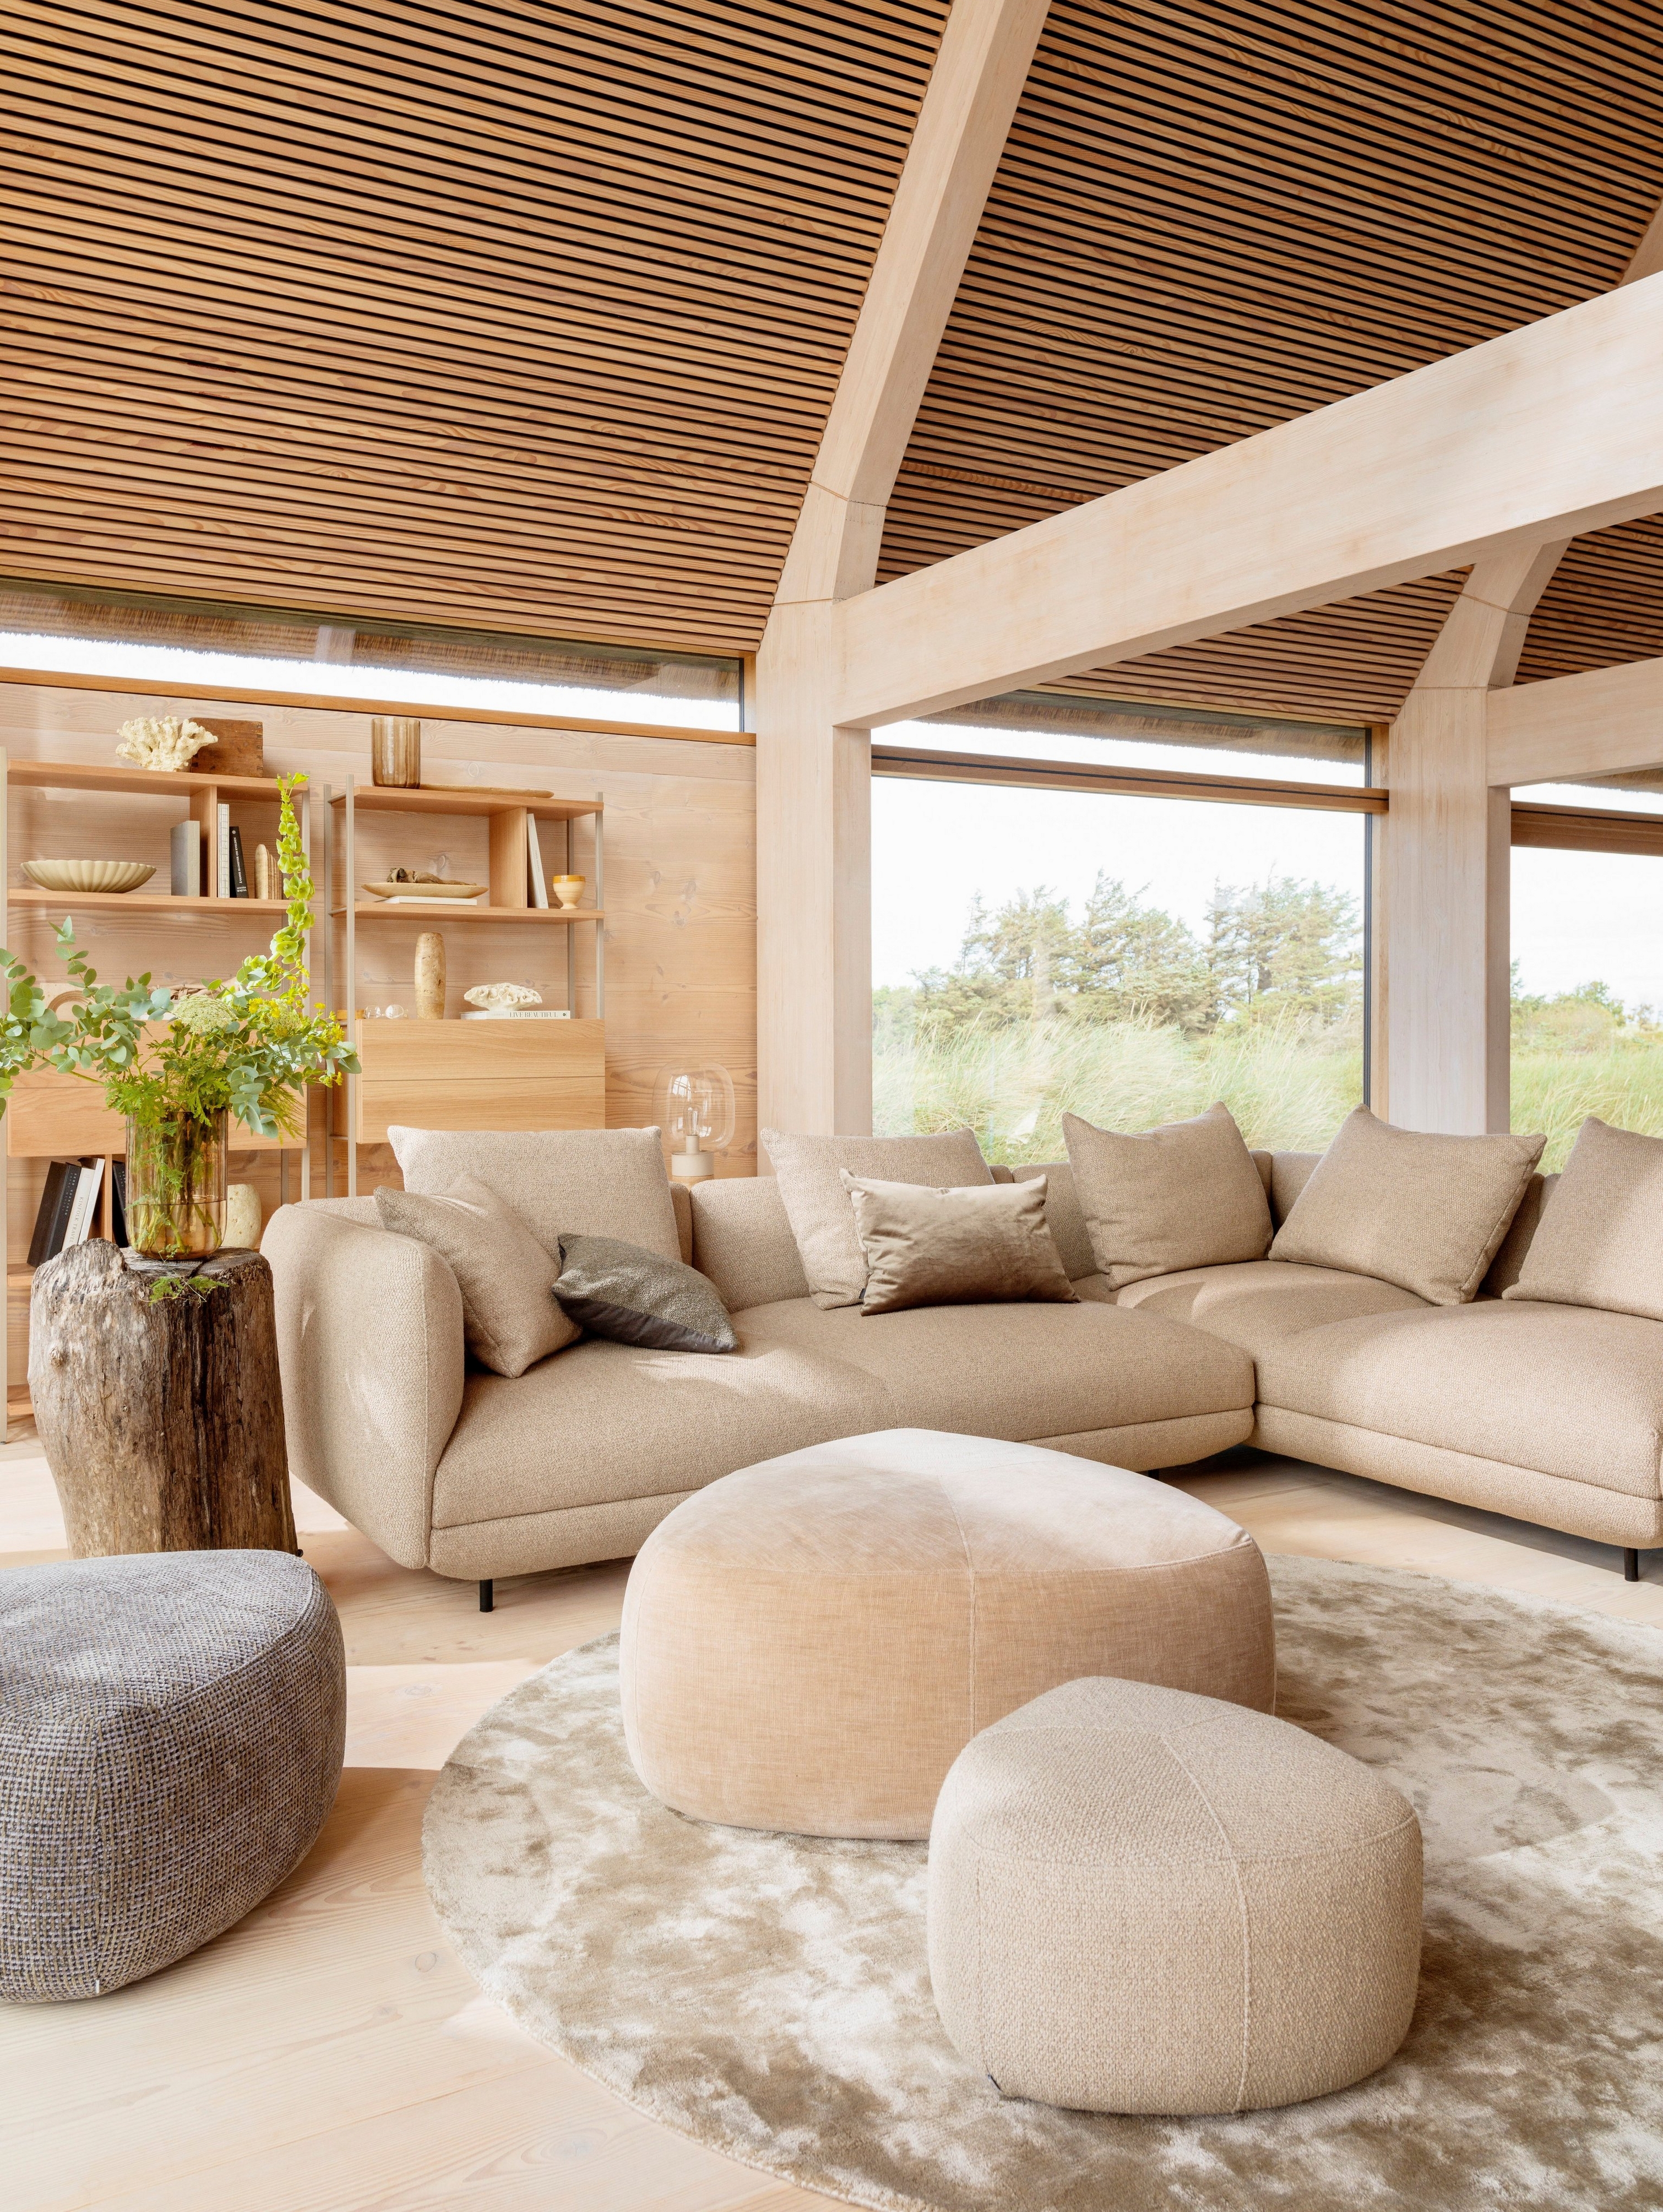 Warm, cosy living space featuring the Salamanca sofa upholstered in brown Lazio fabric.